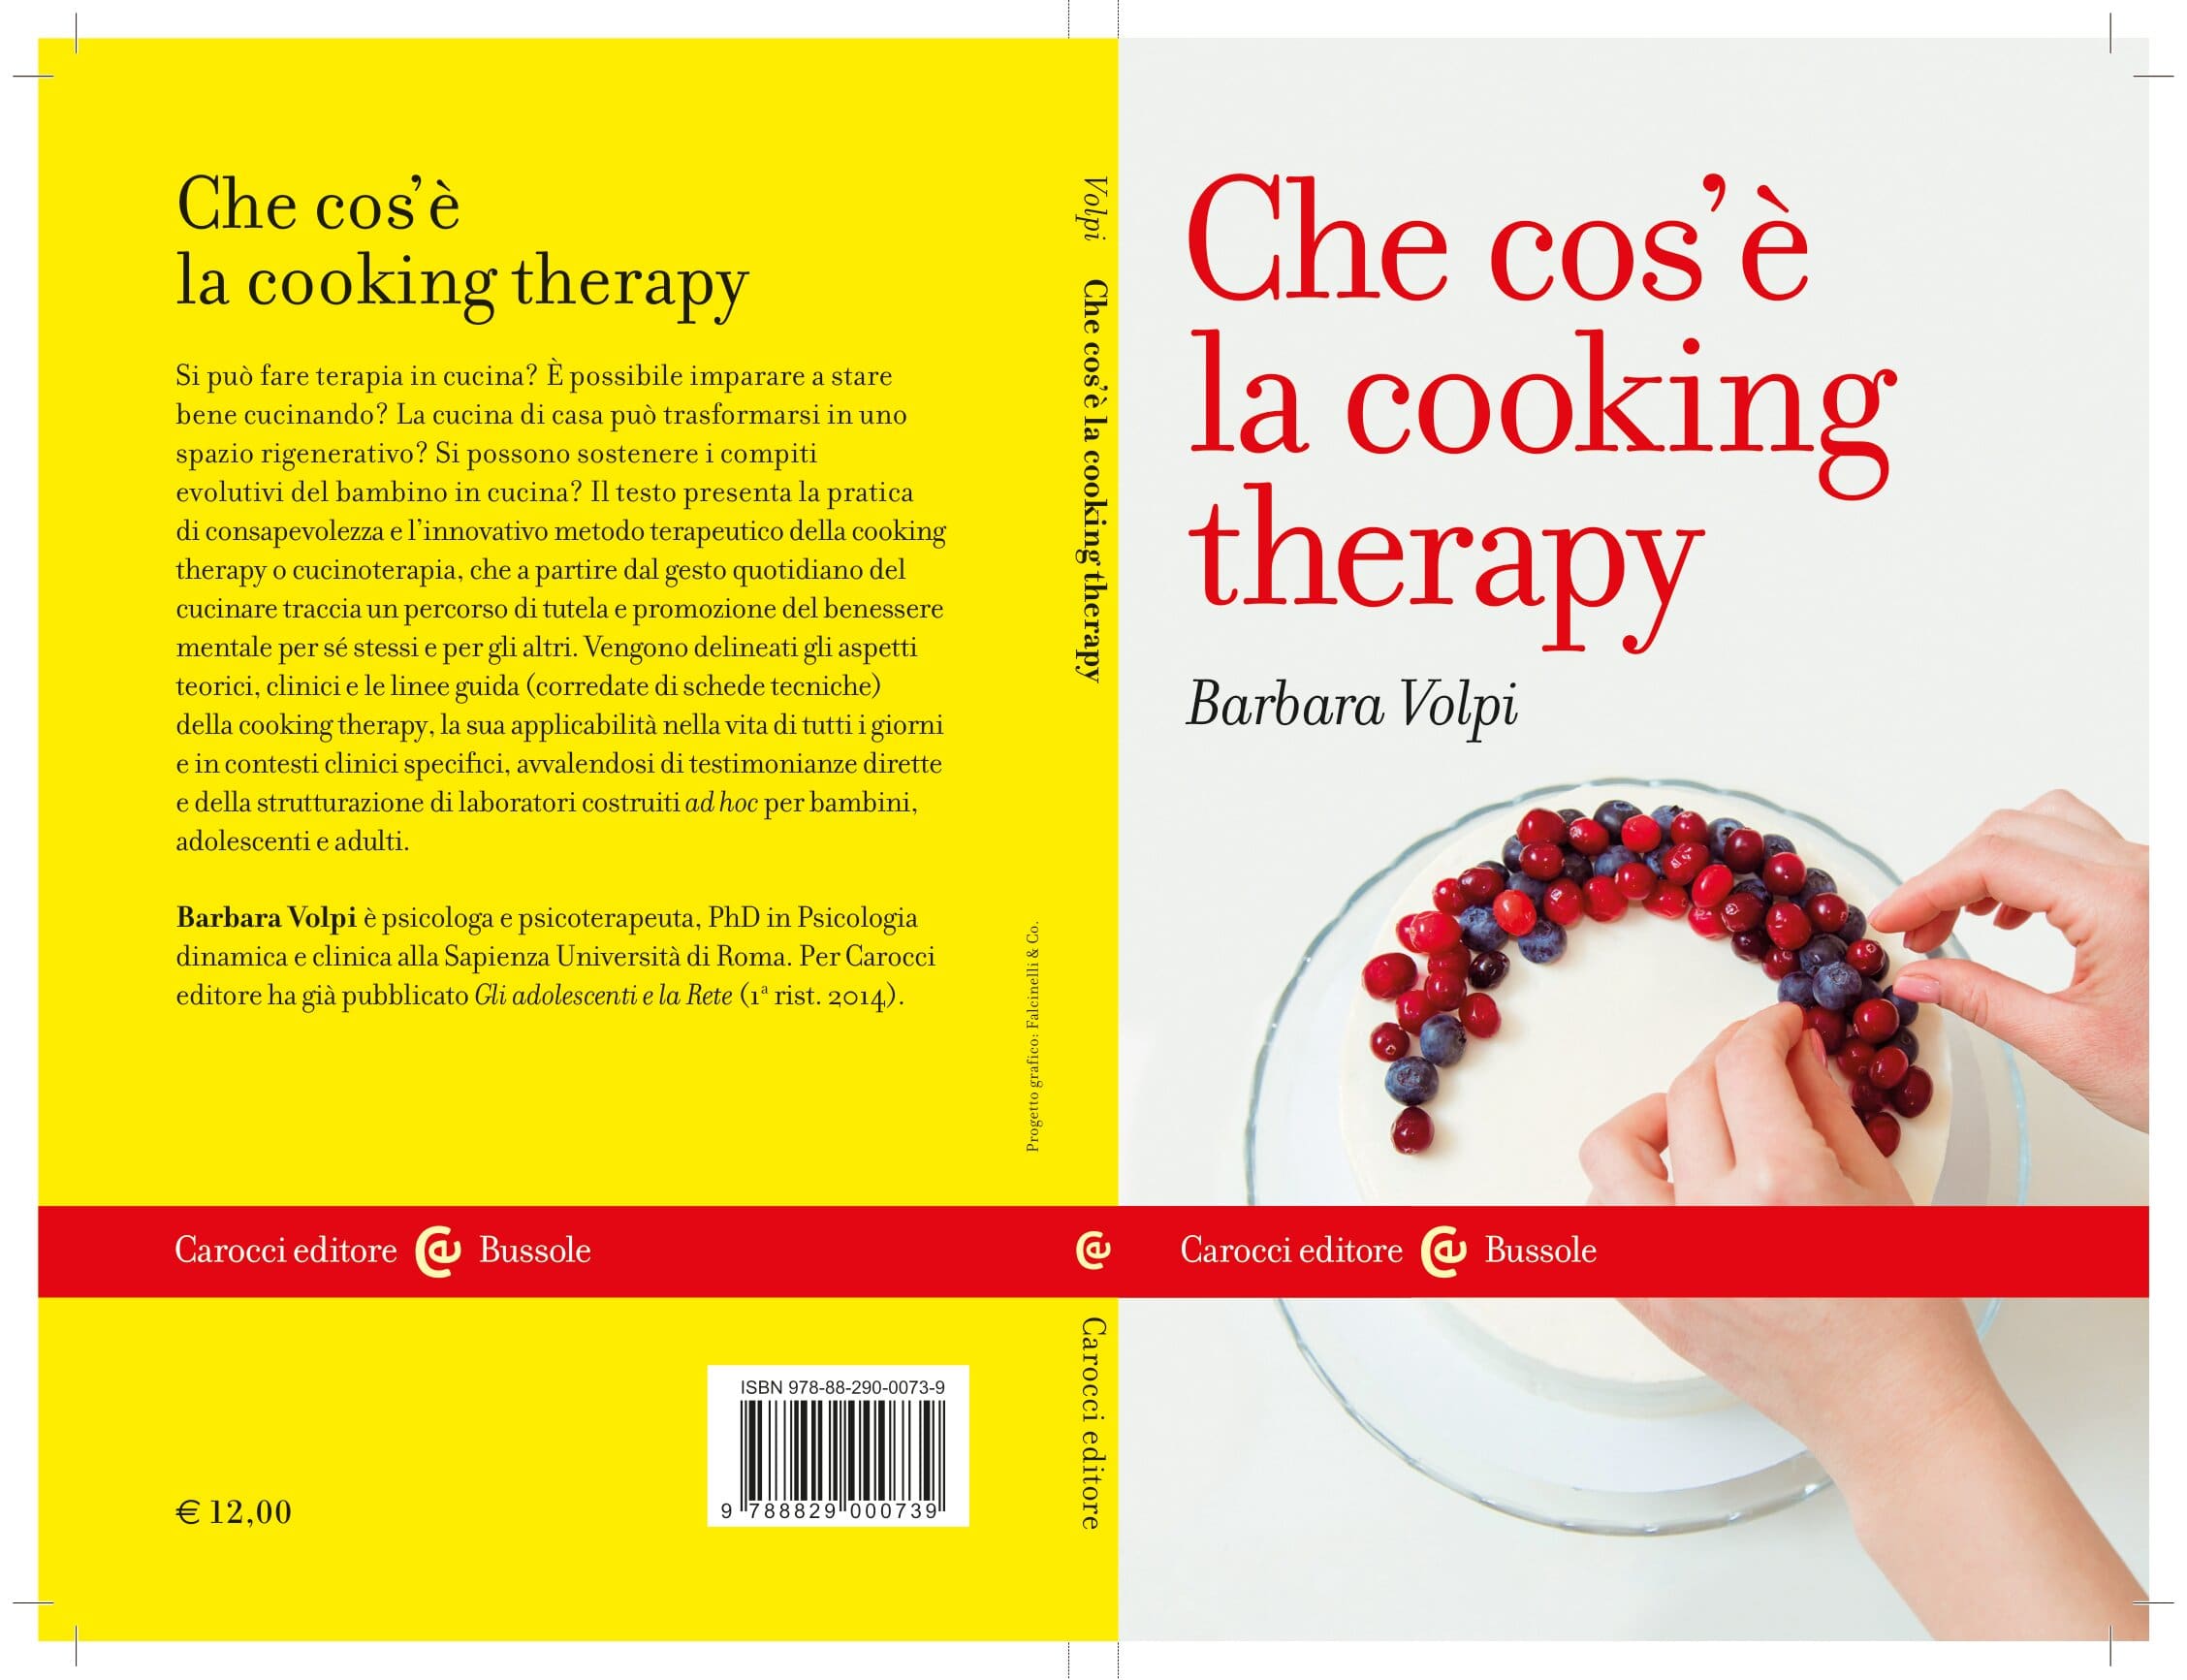 20200903 BUS Volpi CheCosELaCookingTherapy COVER